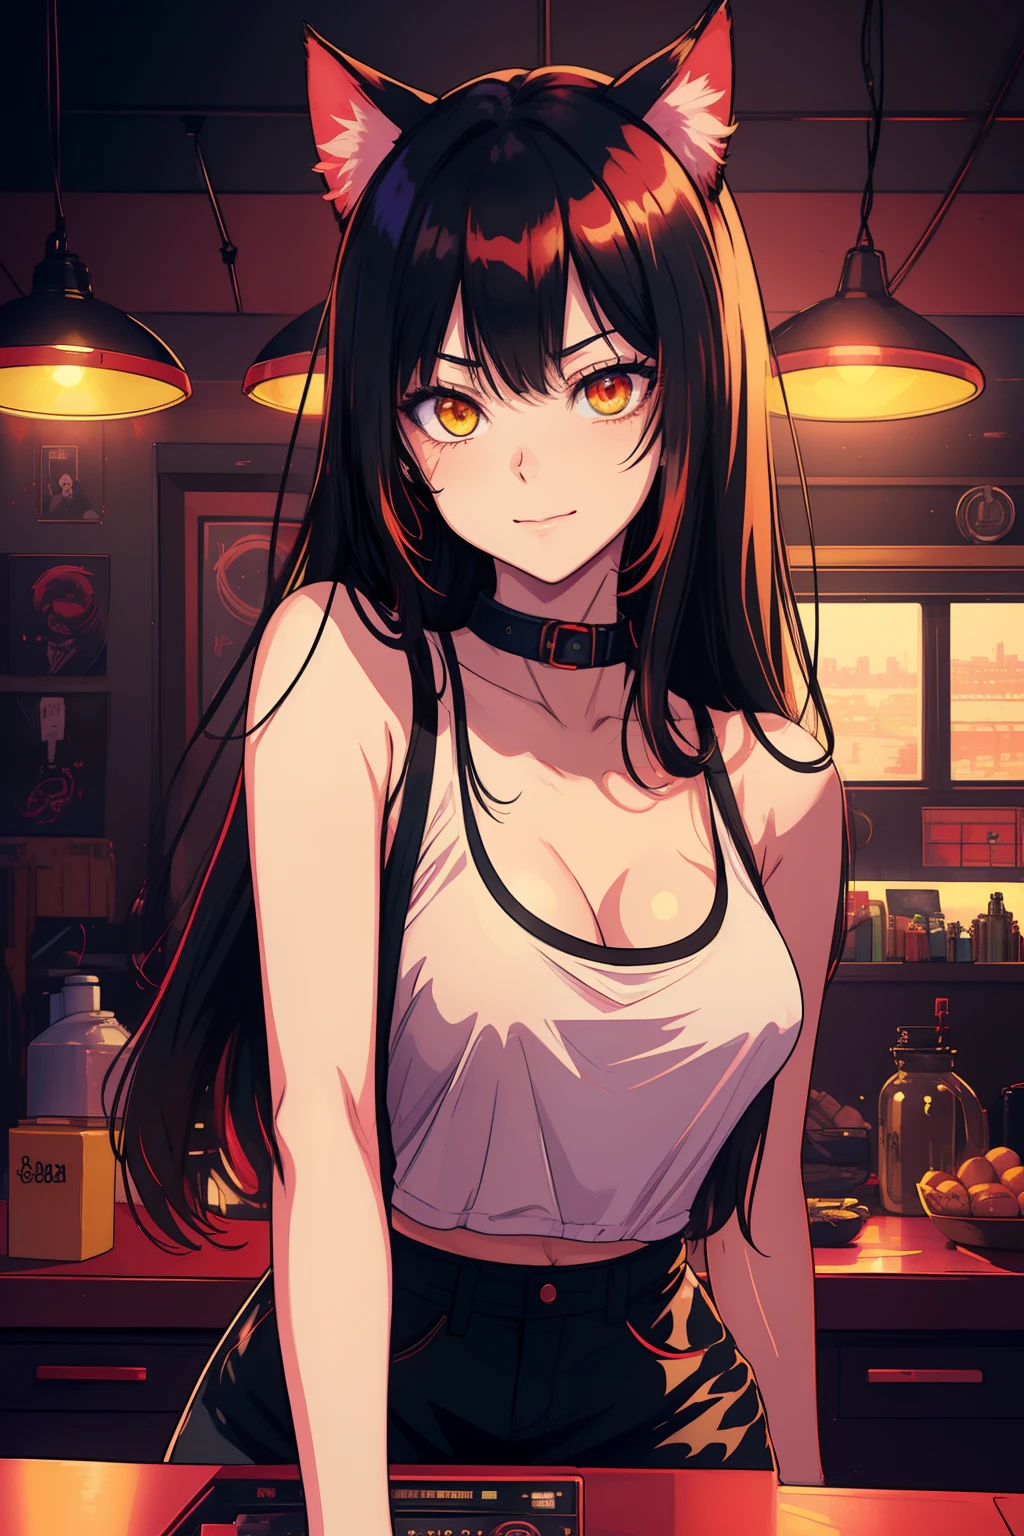 (((Portrait))), (NSFW, slim body), (best quality, 4k, 8k, high-res, ultra-detailed, anime style, pastel), catgirl, long black hair, yellow glowing eyes, looking at viewer, smug, slightly smiling, collar, aesthetic, vaporwave interior, red lightning, red interior, succubus, red light, dark red lights, tank top